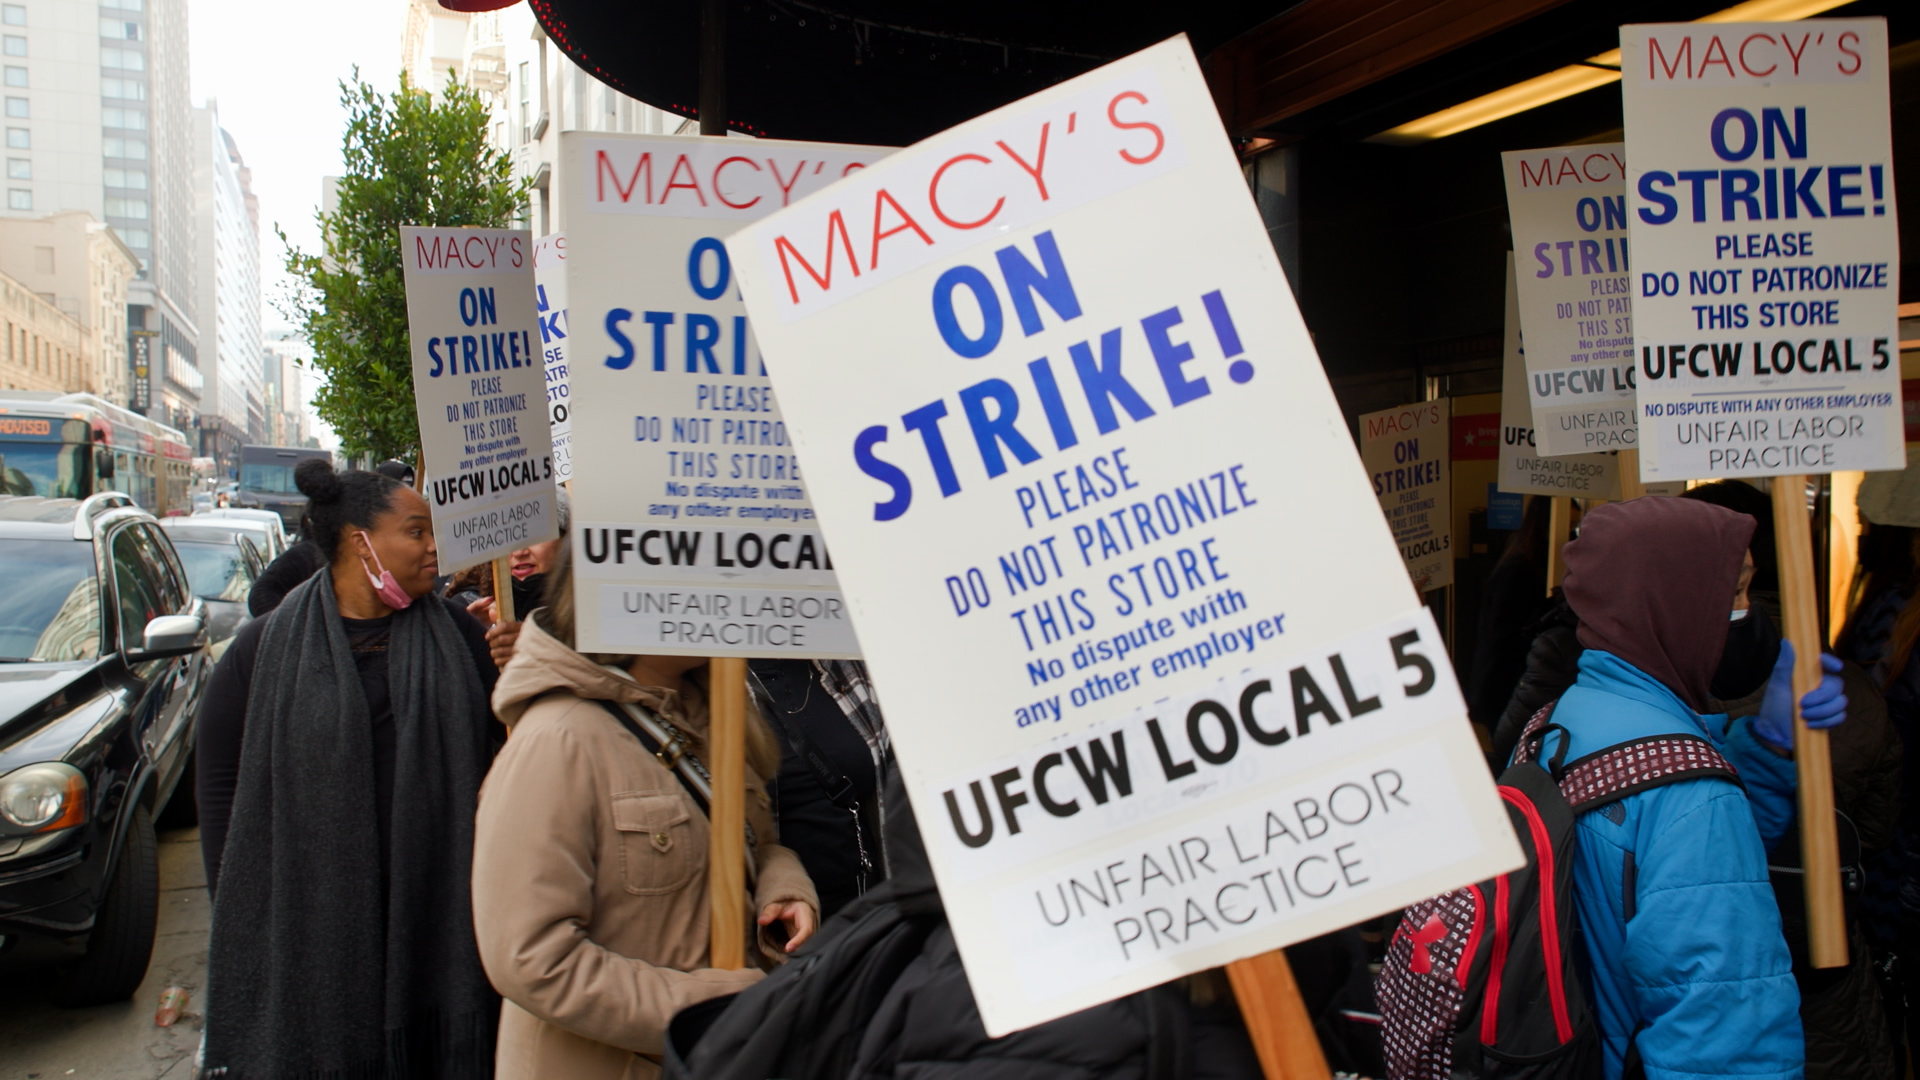 Macy’s Workers in SF Are Striking Two Days Before Christmas. How Did It Get to This?